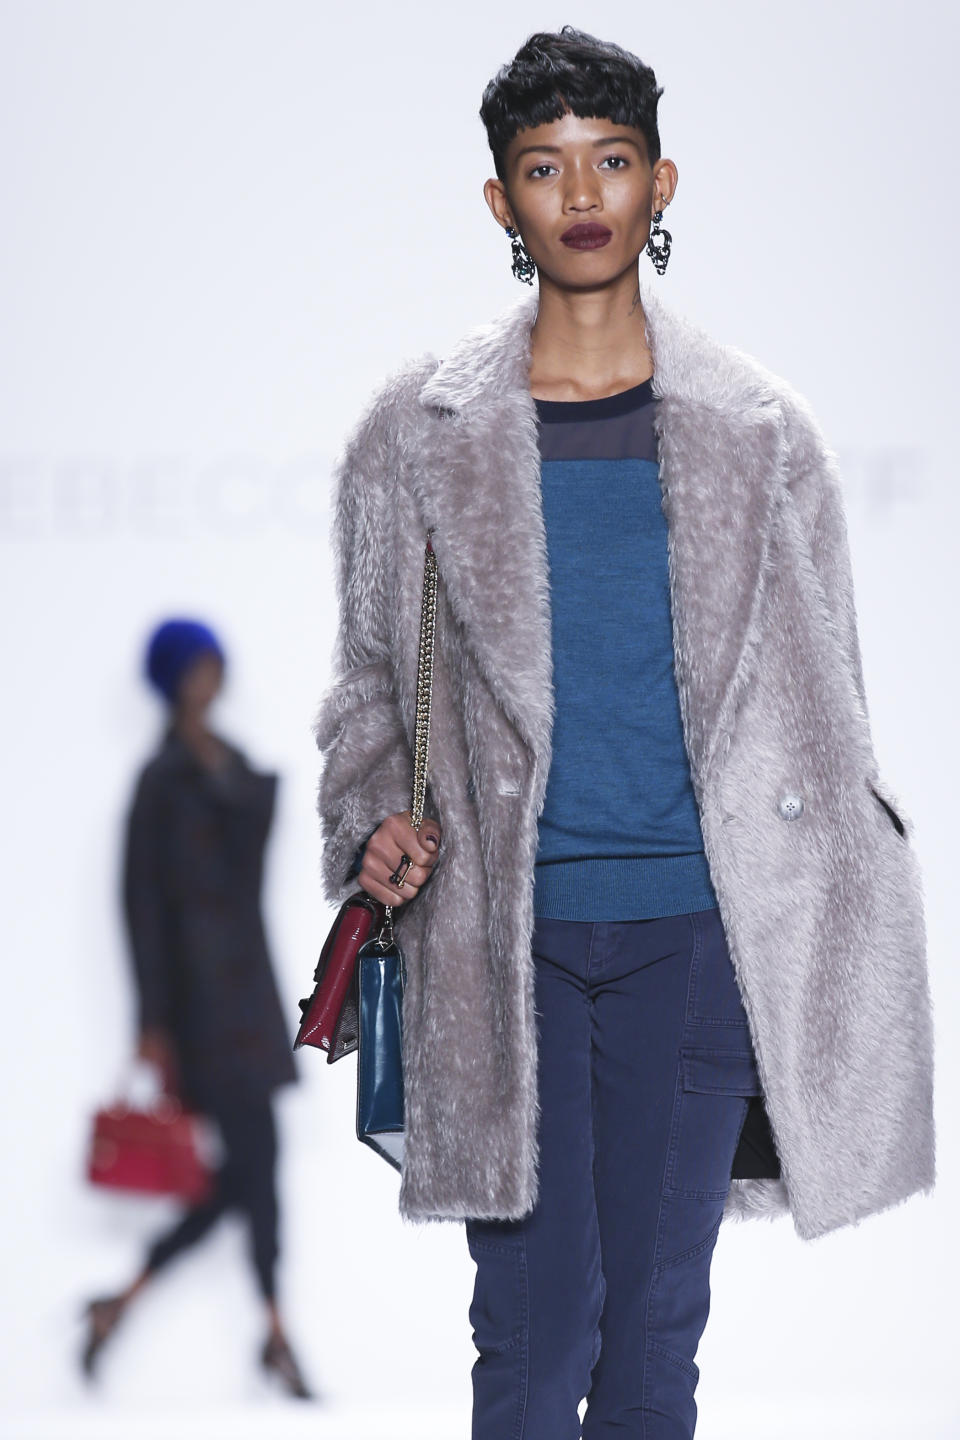 The Rebecca Minkoff Fall 2014 collection is modeled during Fashion Week, Friday, Feb. 7, 2014, in New York. (AP Photo/John Minchillo)